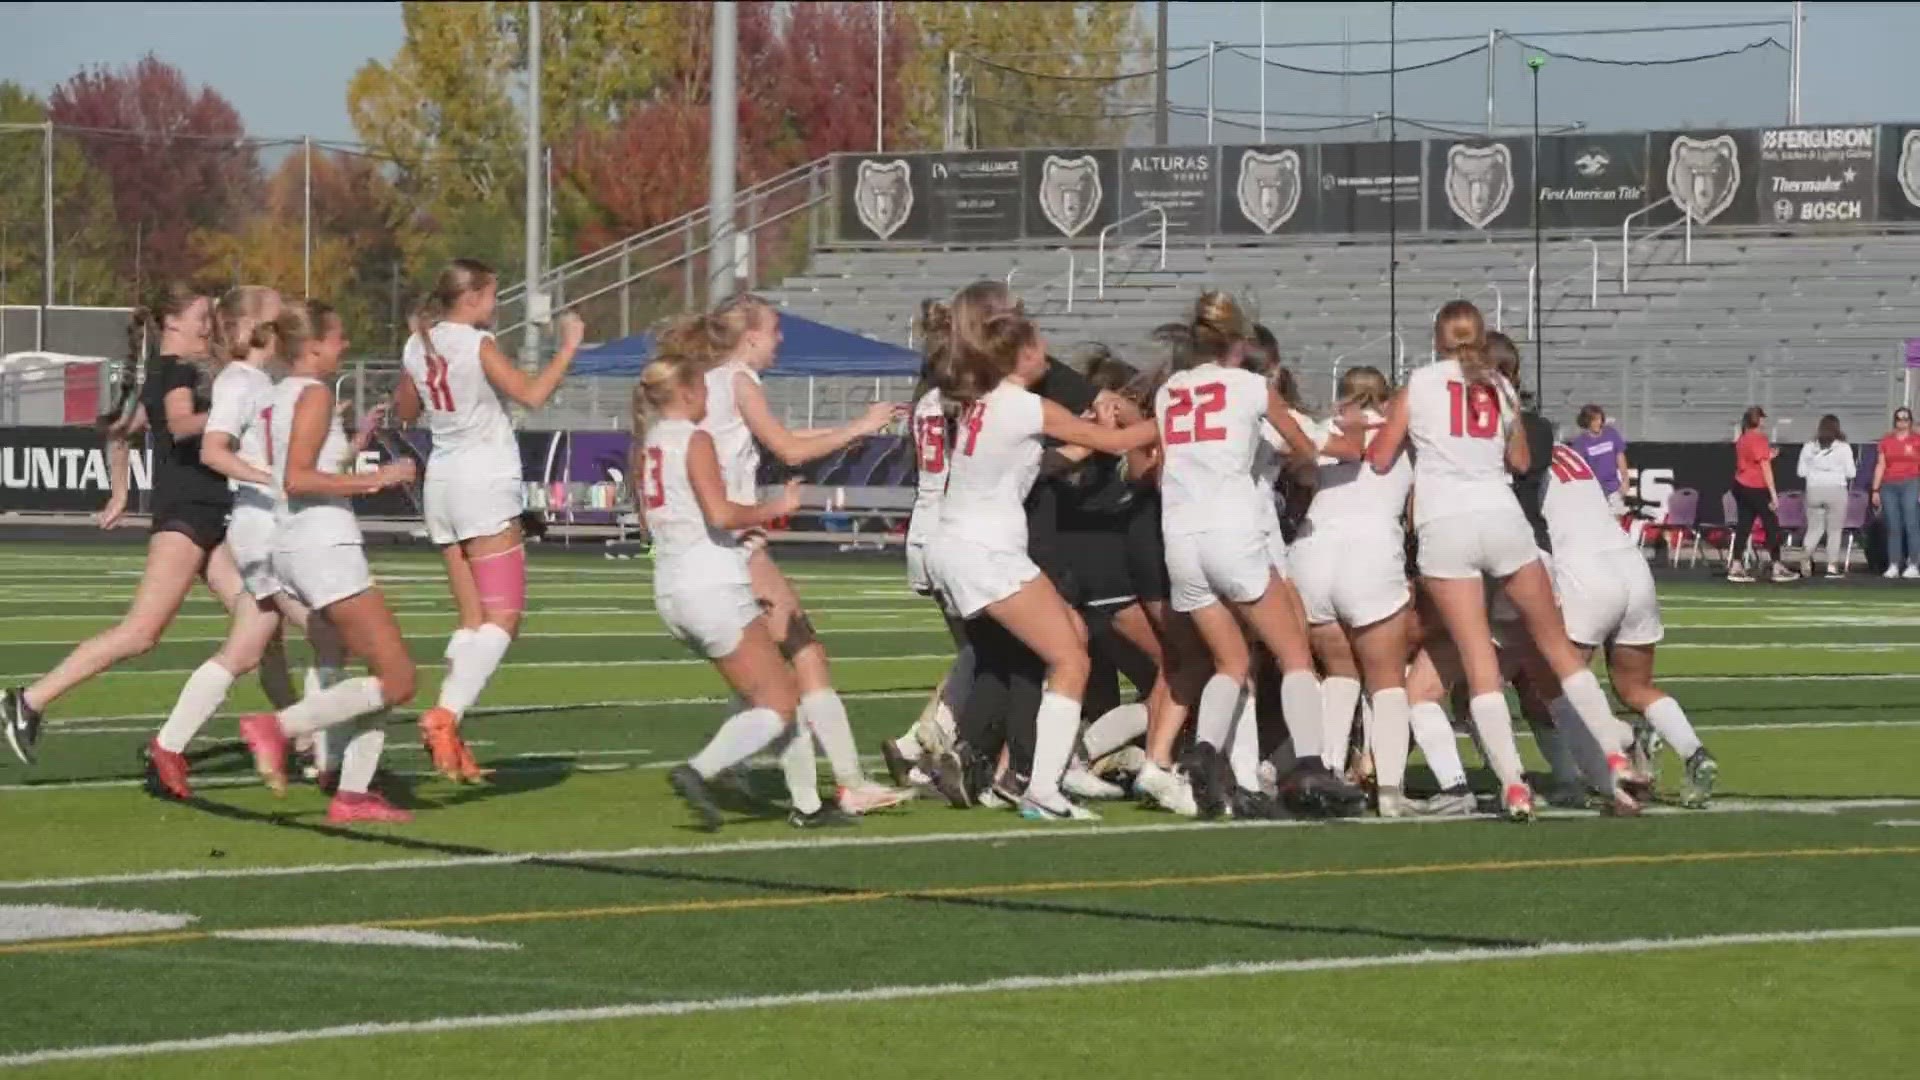 The Storm (16-4-1) captured their first-ever 5A girls soccer state championship Saturday with a 3-2 win in penalty-kick shootout against Boise (17-1-1).